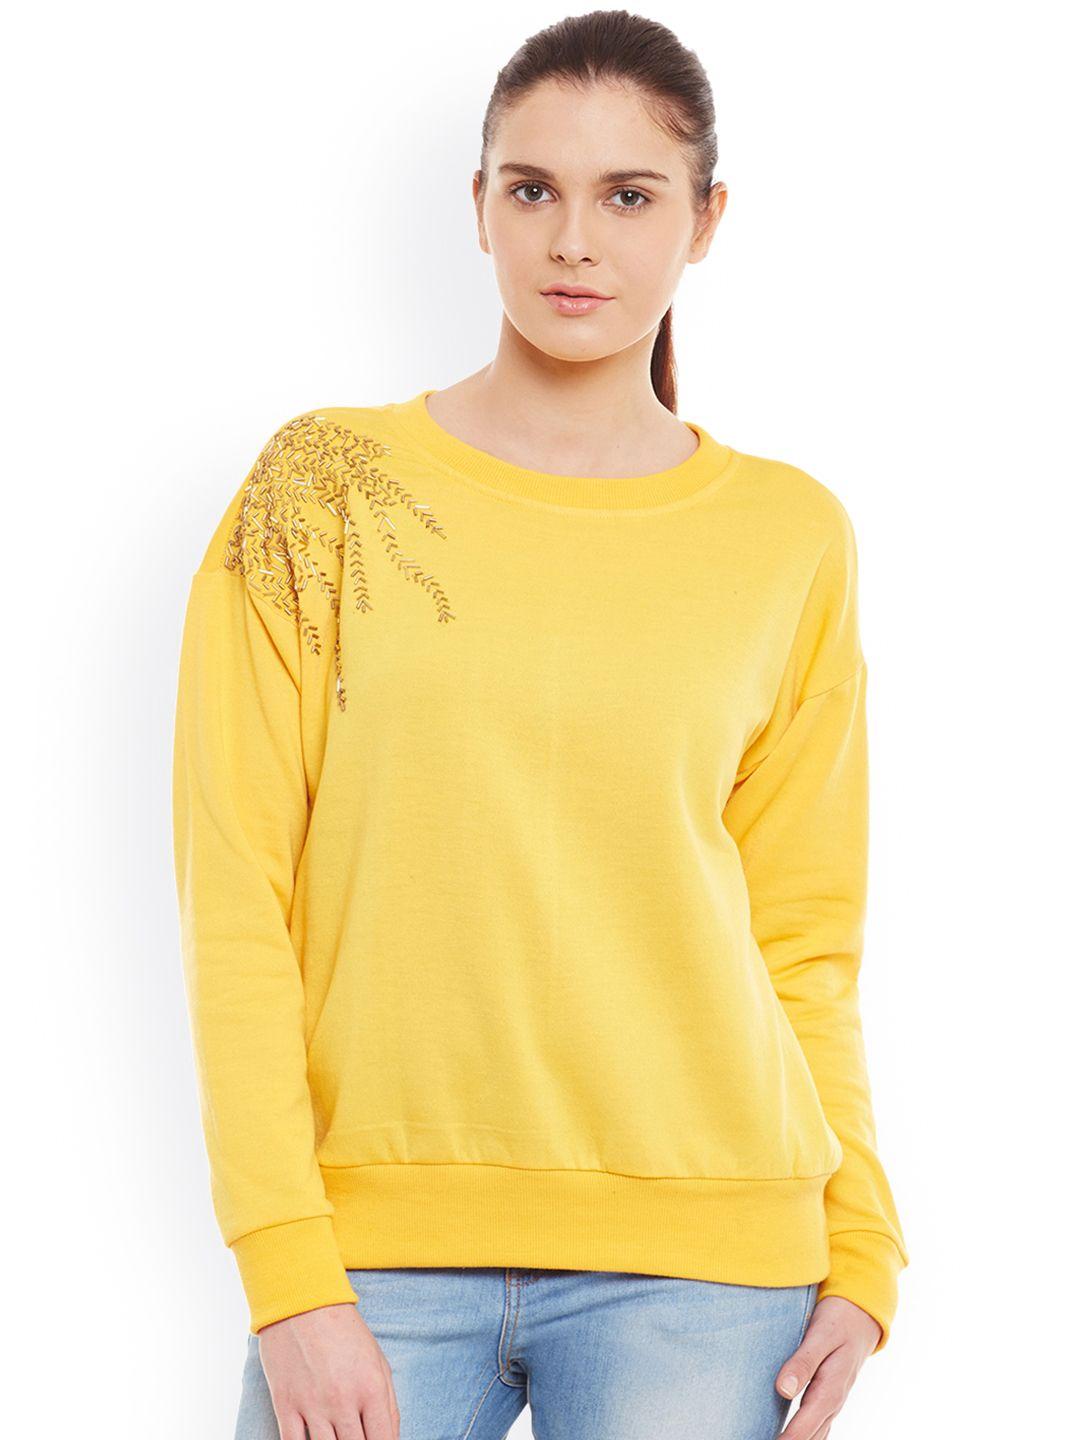 belle-fille-yellow-sweatshirt-with-embellished-detail